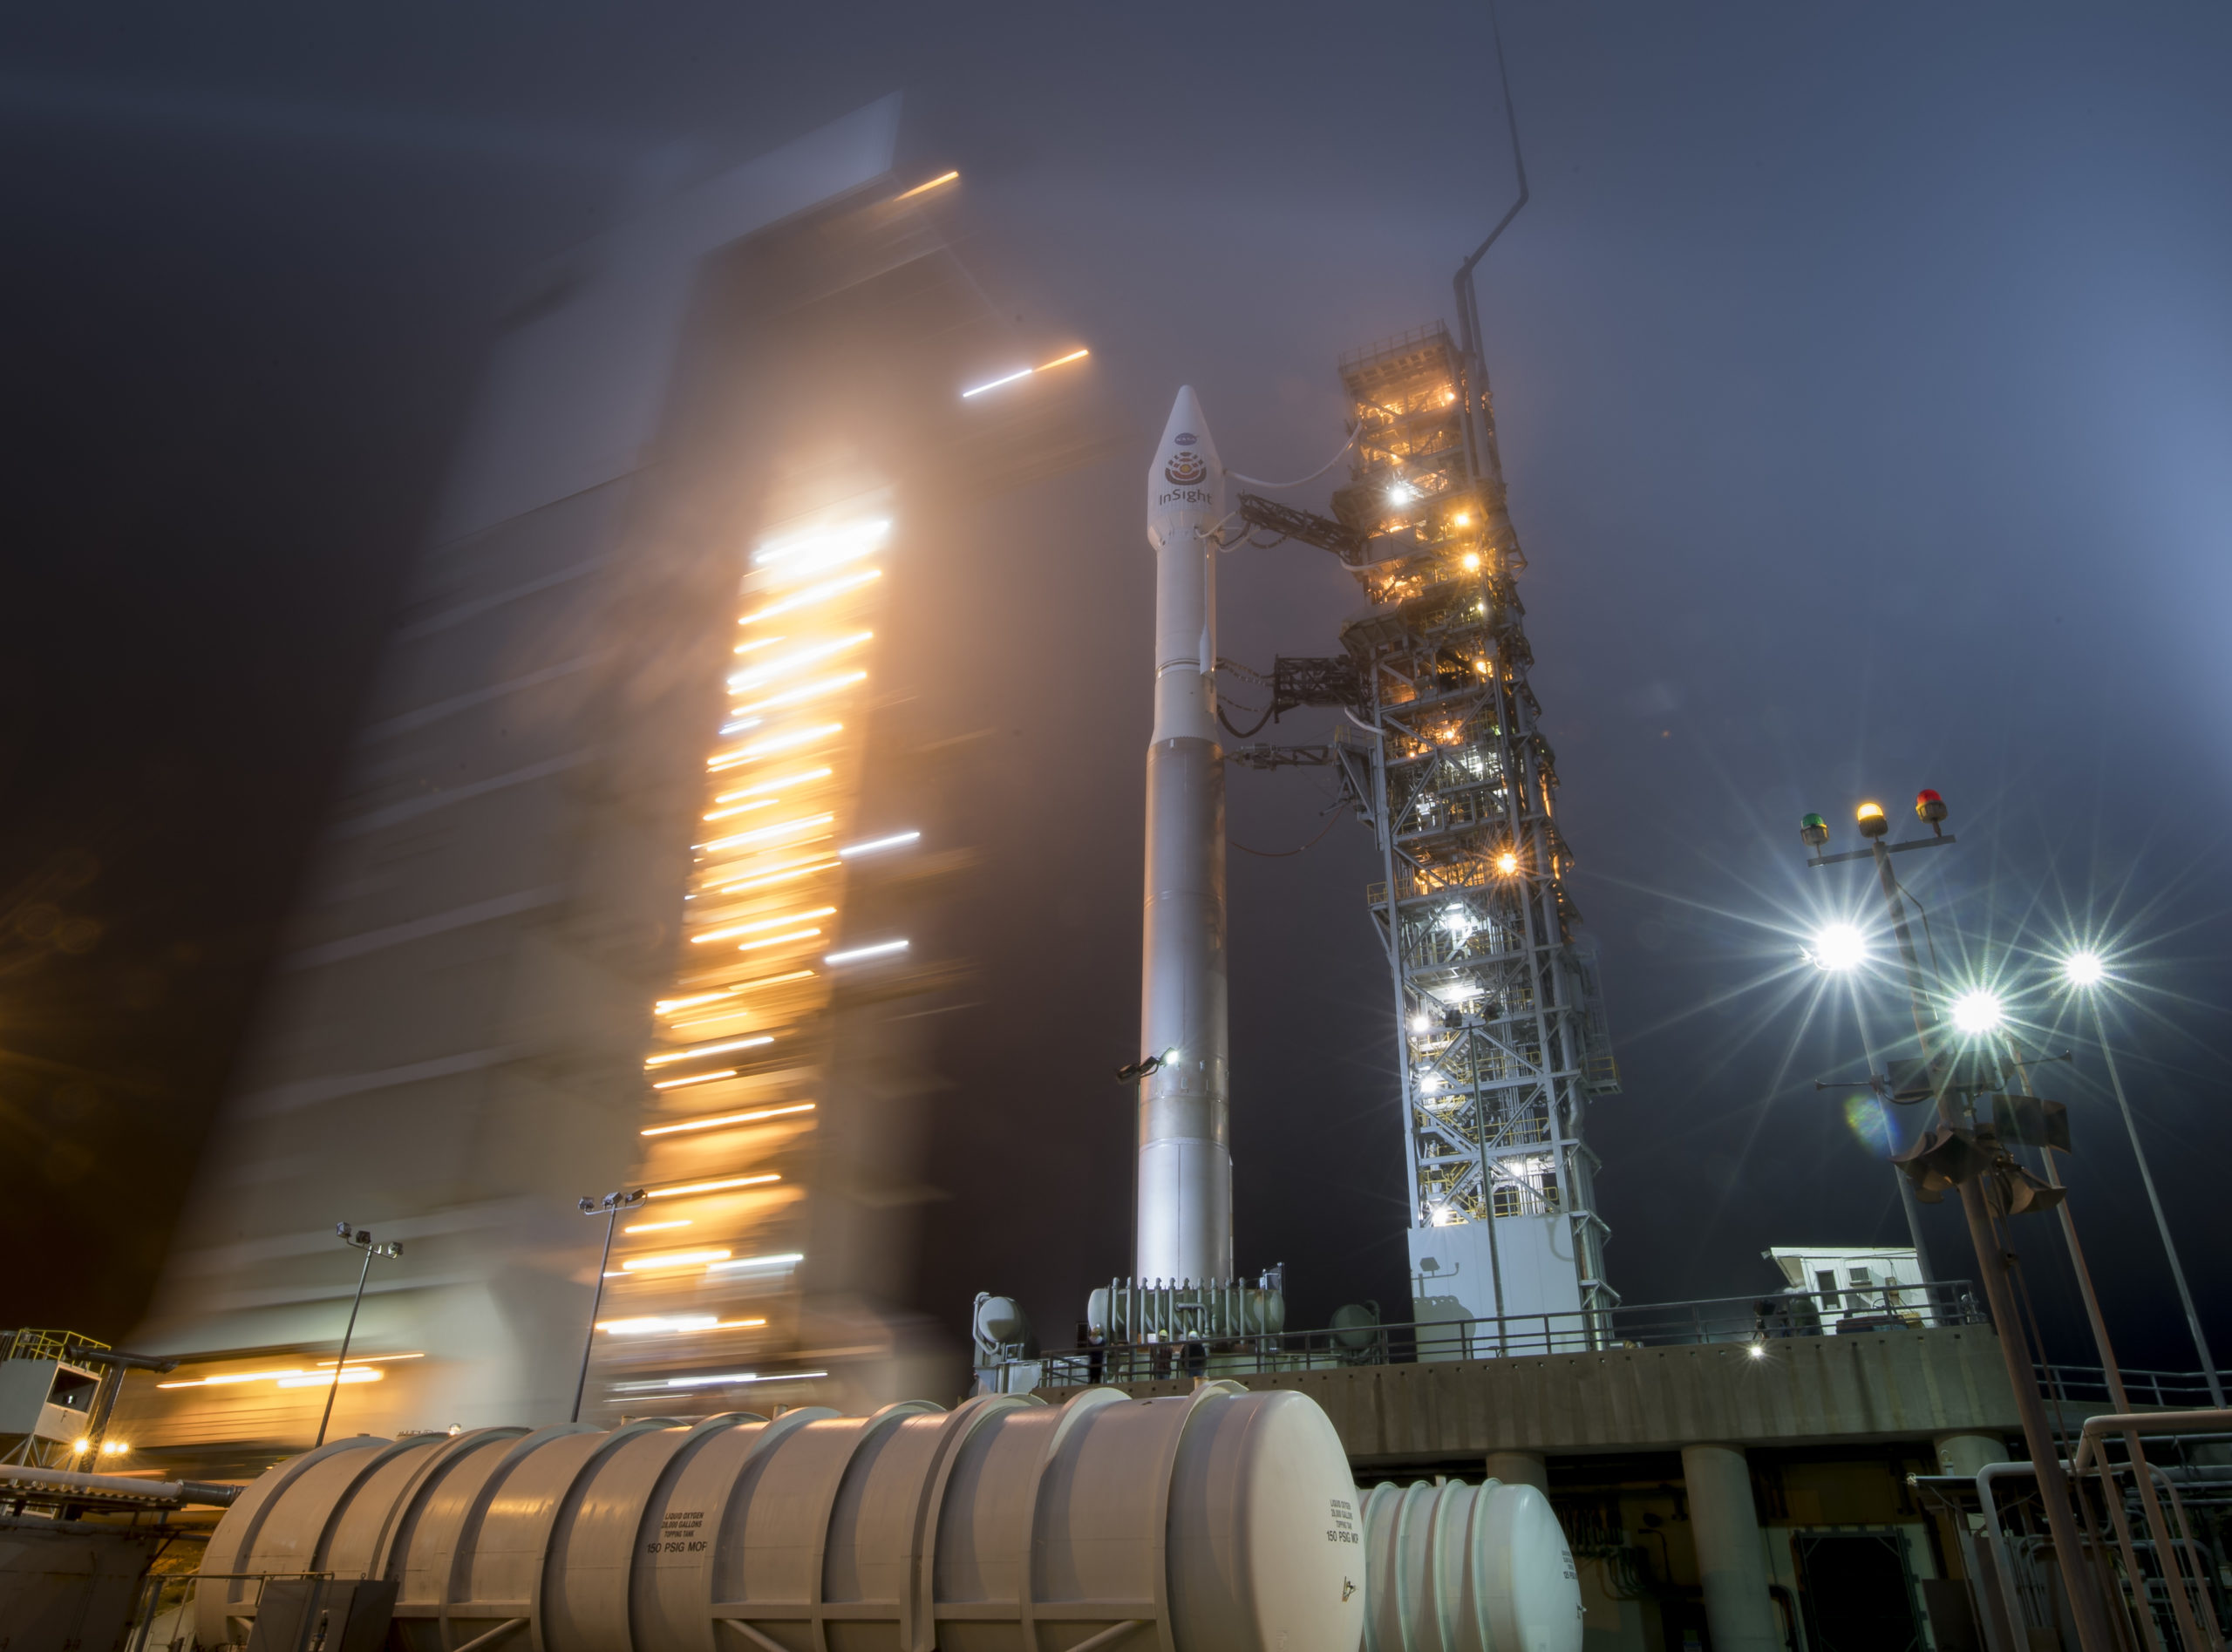 Infuriating Fog And Exhilarating Geophysics: Behind The Scenes Of NASA’s InSight Launch To Mars